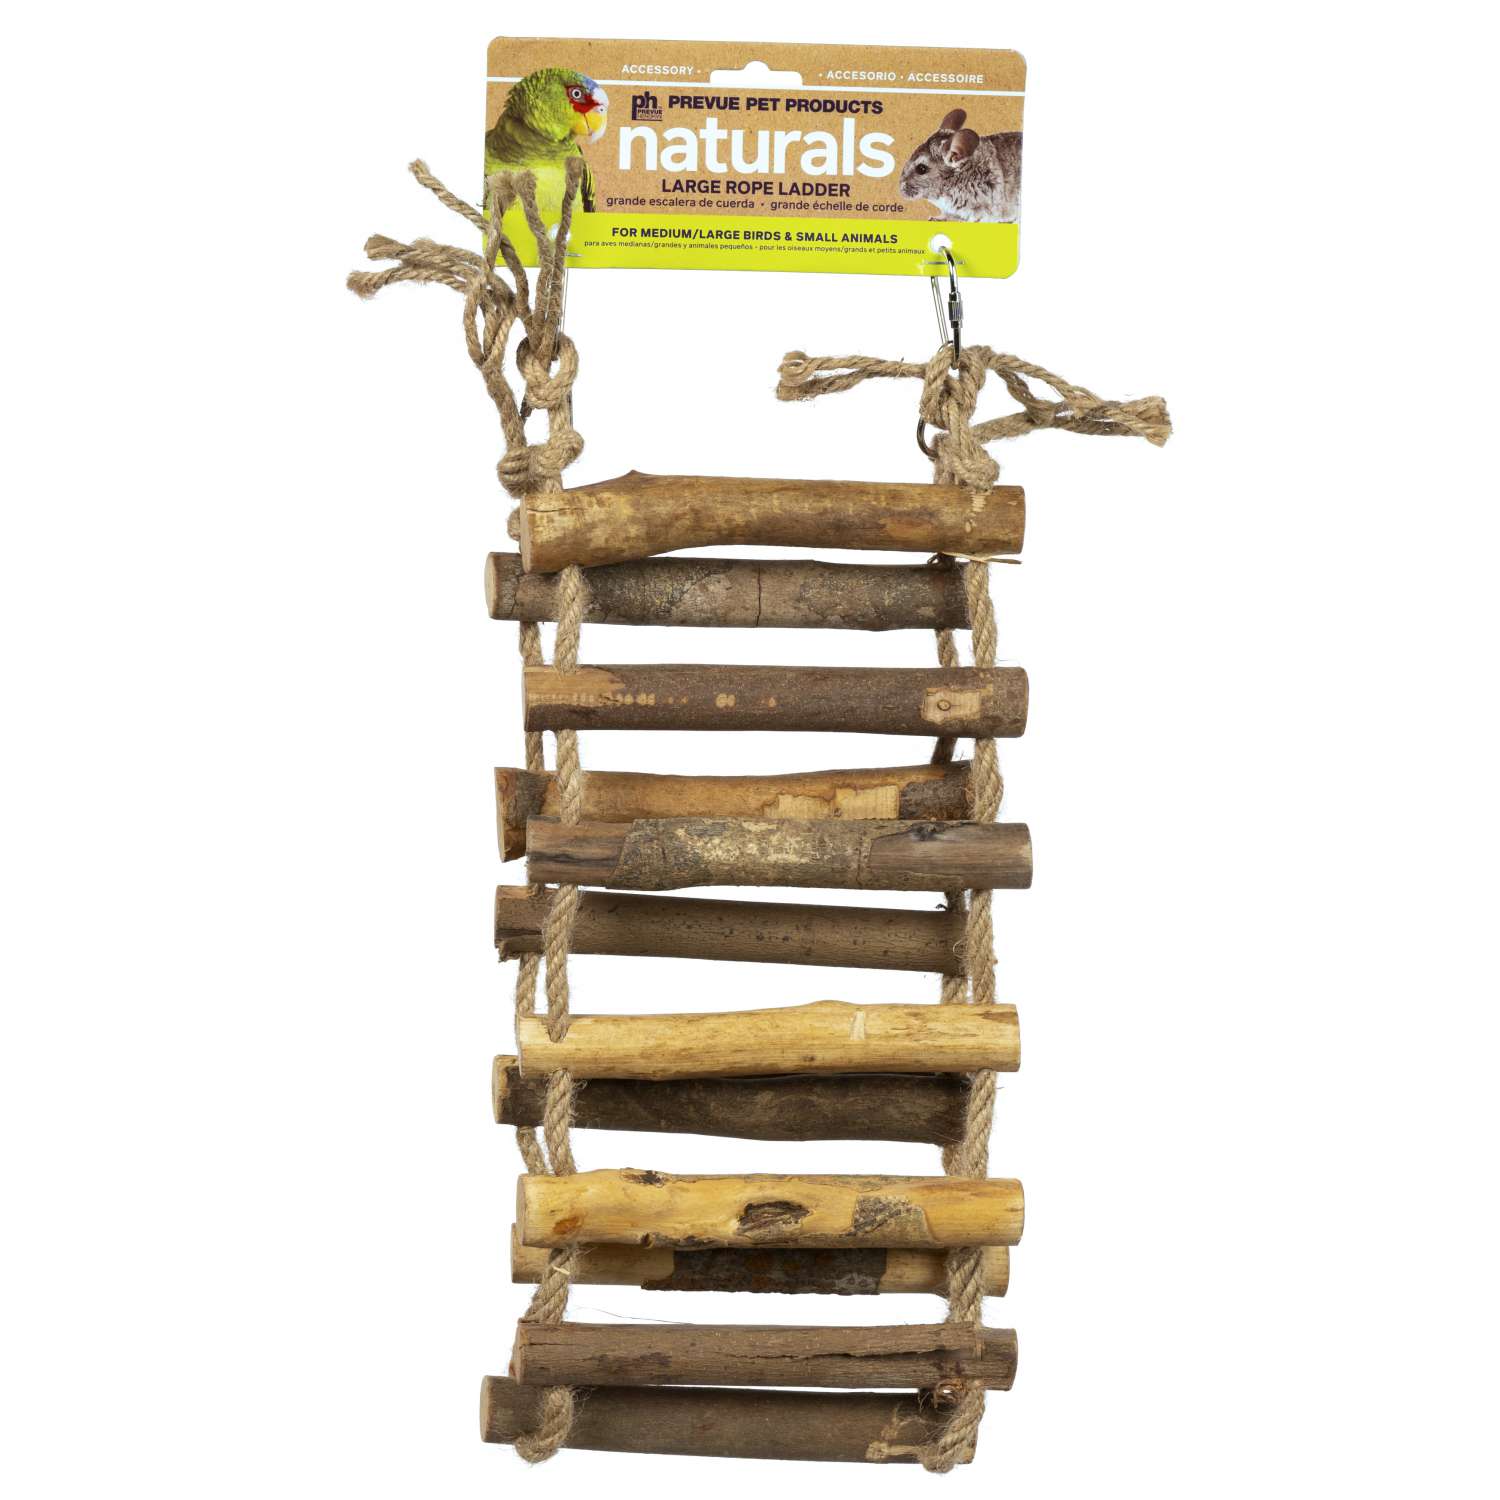 Large Rope Bird Ladder 62807 Prevue Pet Products